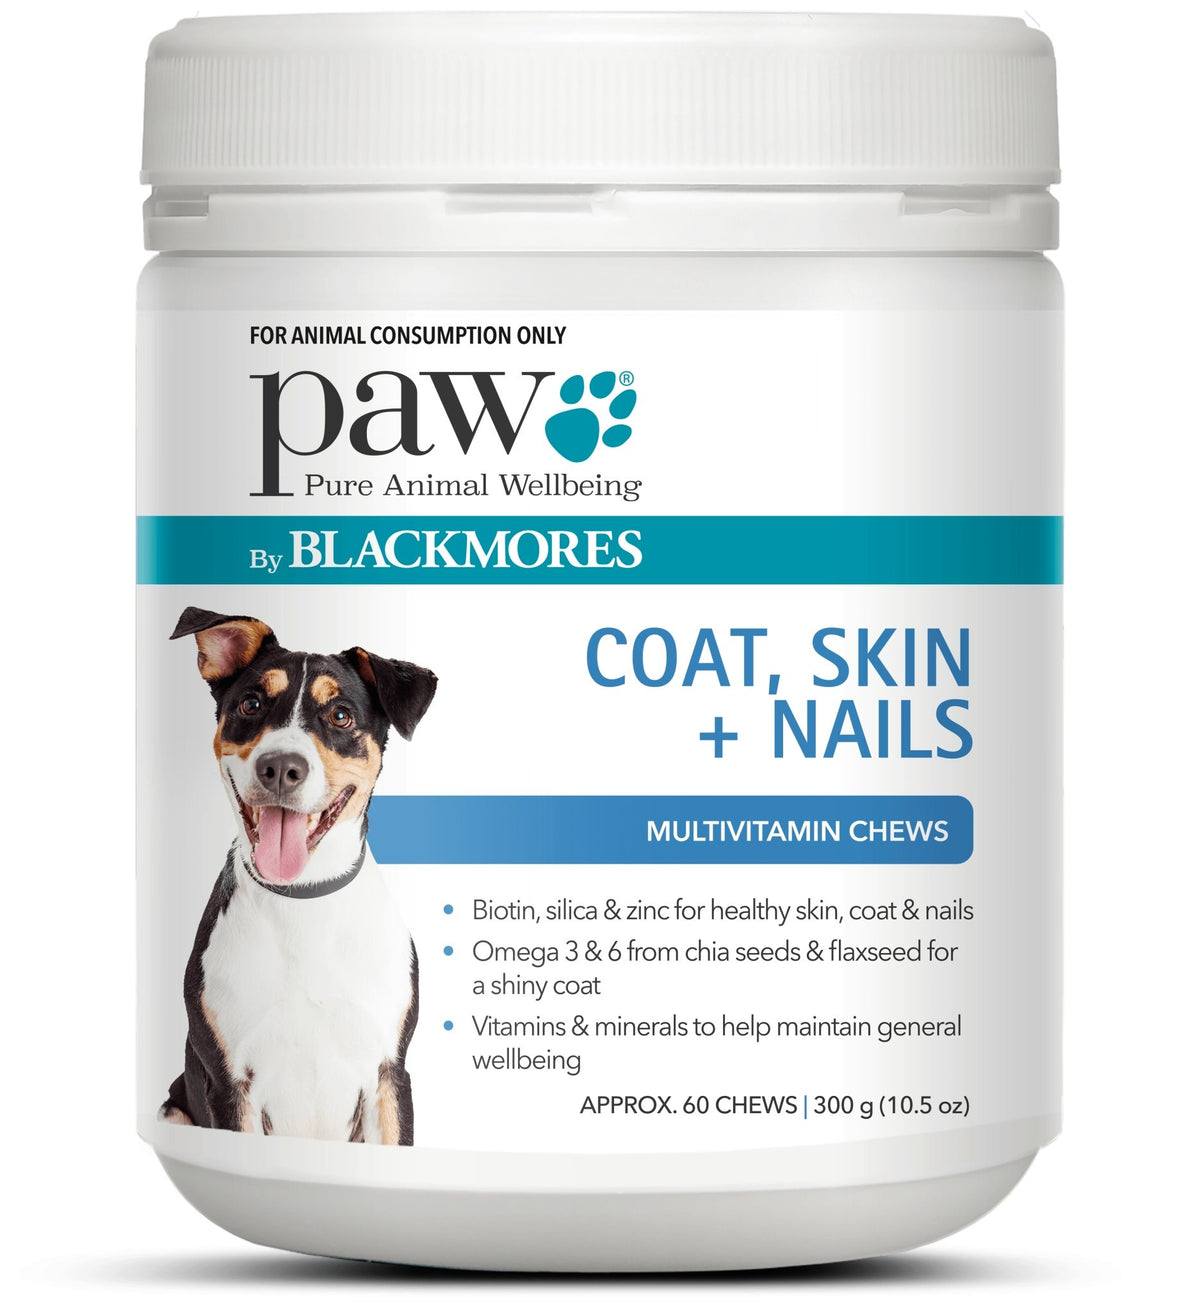 Blackmores PAW Coat, Skin + Nail Multivitamin Chews For Dogs - 300g (approx. 60 chews) - PAWS CLUB